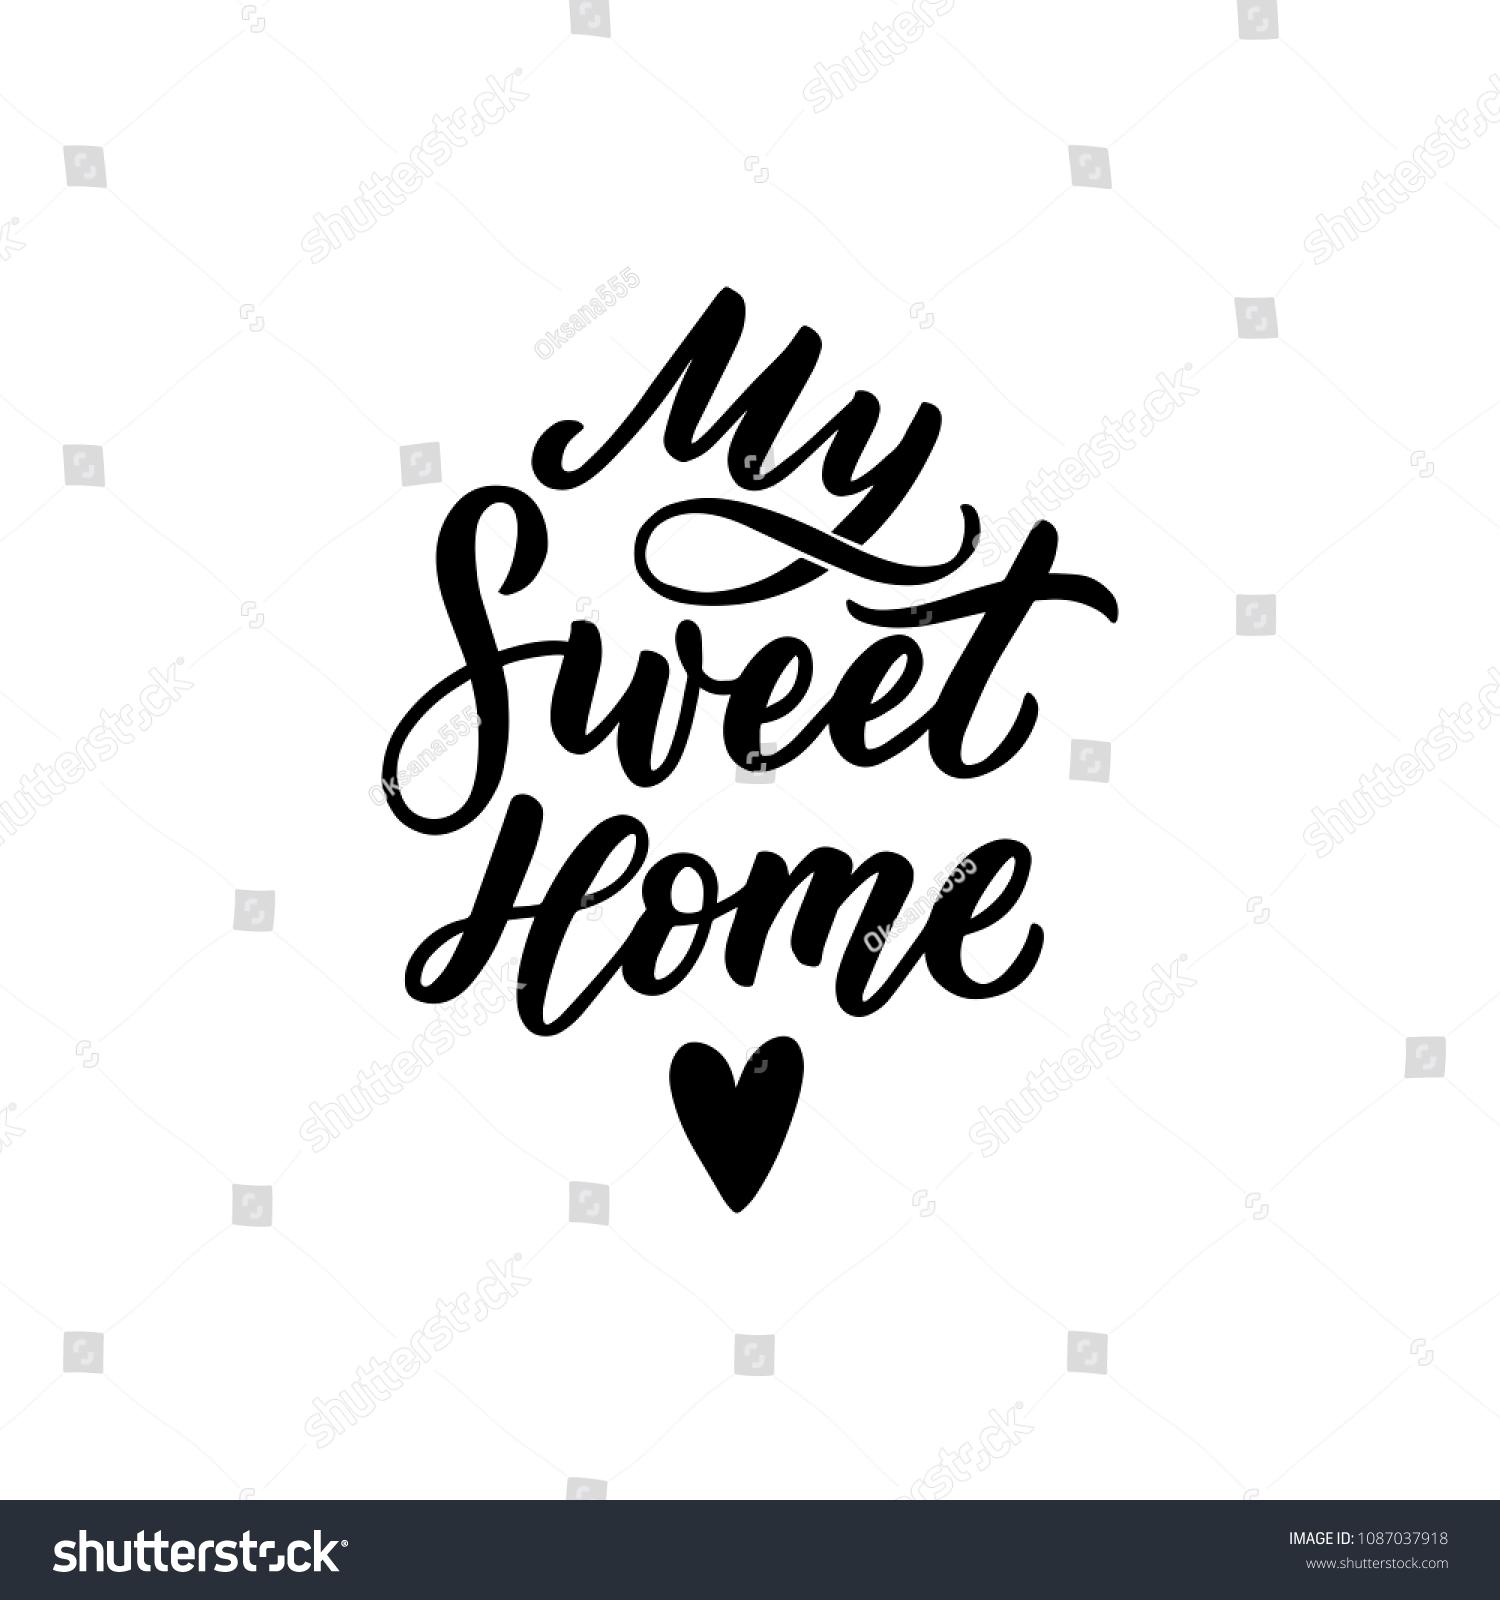 stock-vector-hand-drawn-lettering-my-sweet-home-for-card-poster-decor-interior-home-sweet-home-typography-1087037918 - Copy